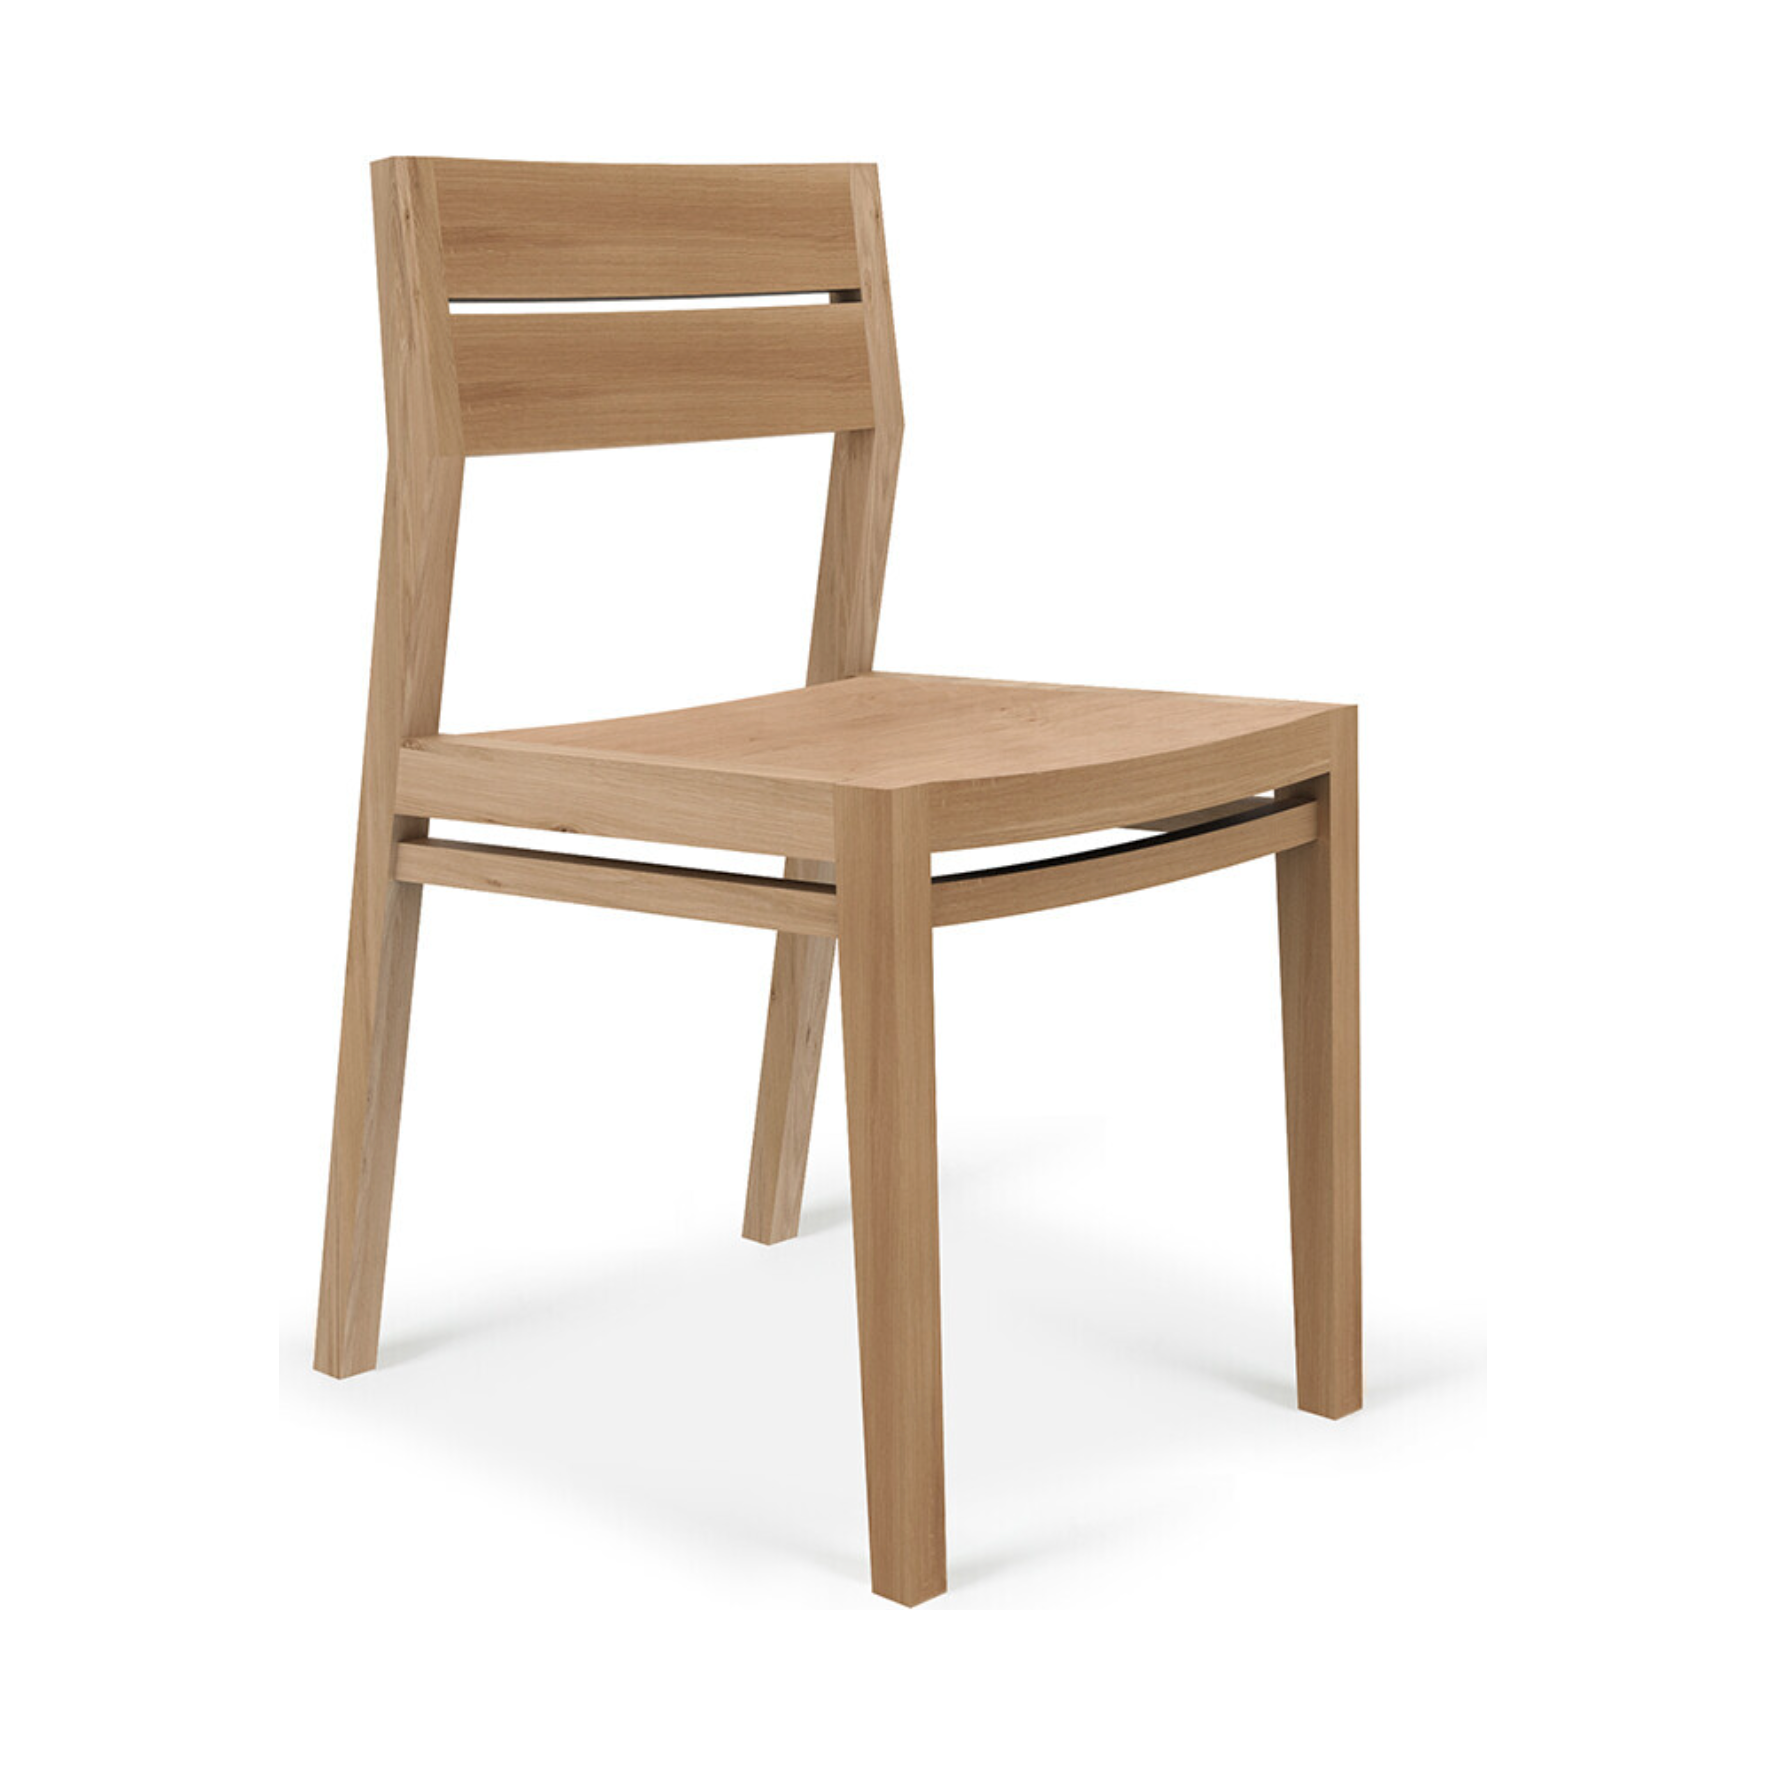 This Oak Ex 1 Dining Chair is a popular favorite! We love its timeless design and the comfort of natural oak. We can imagine this chair adding a sense of cozy charm to your dining space or kitchen!  Dimensions: 17"w x 22.5"d x 32.5"h  Weight: 19 lbs  Seat Height: 19"  Contract grade: This item is EN and/or BIFMA certified  Material: Oak, 100% solid wood Finish Options: Oiled or Varnished  Select Varnished for extra protection.